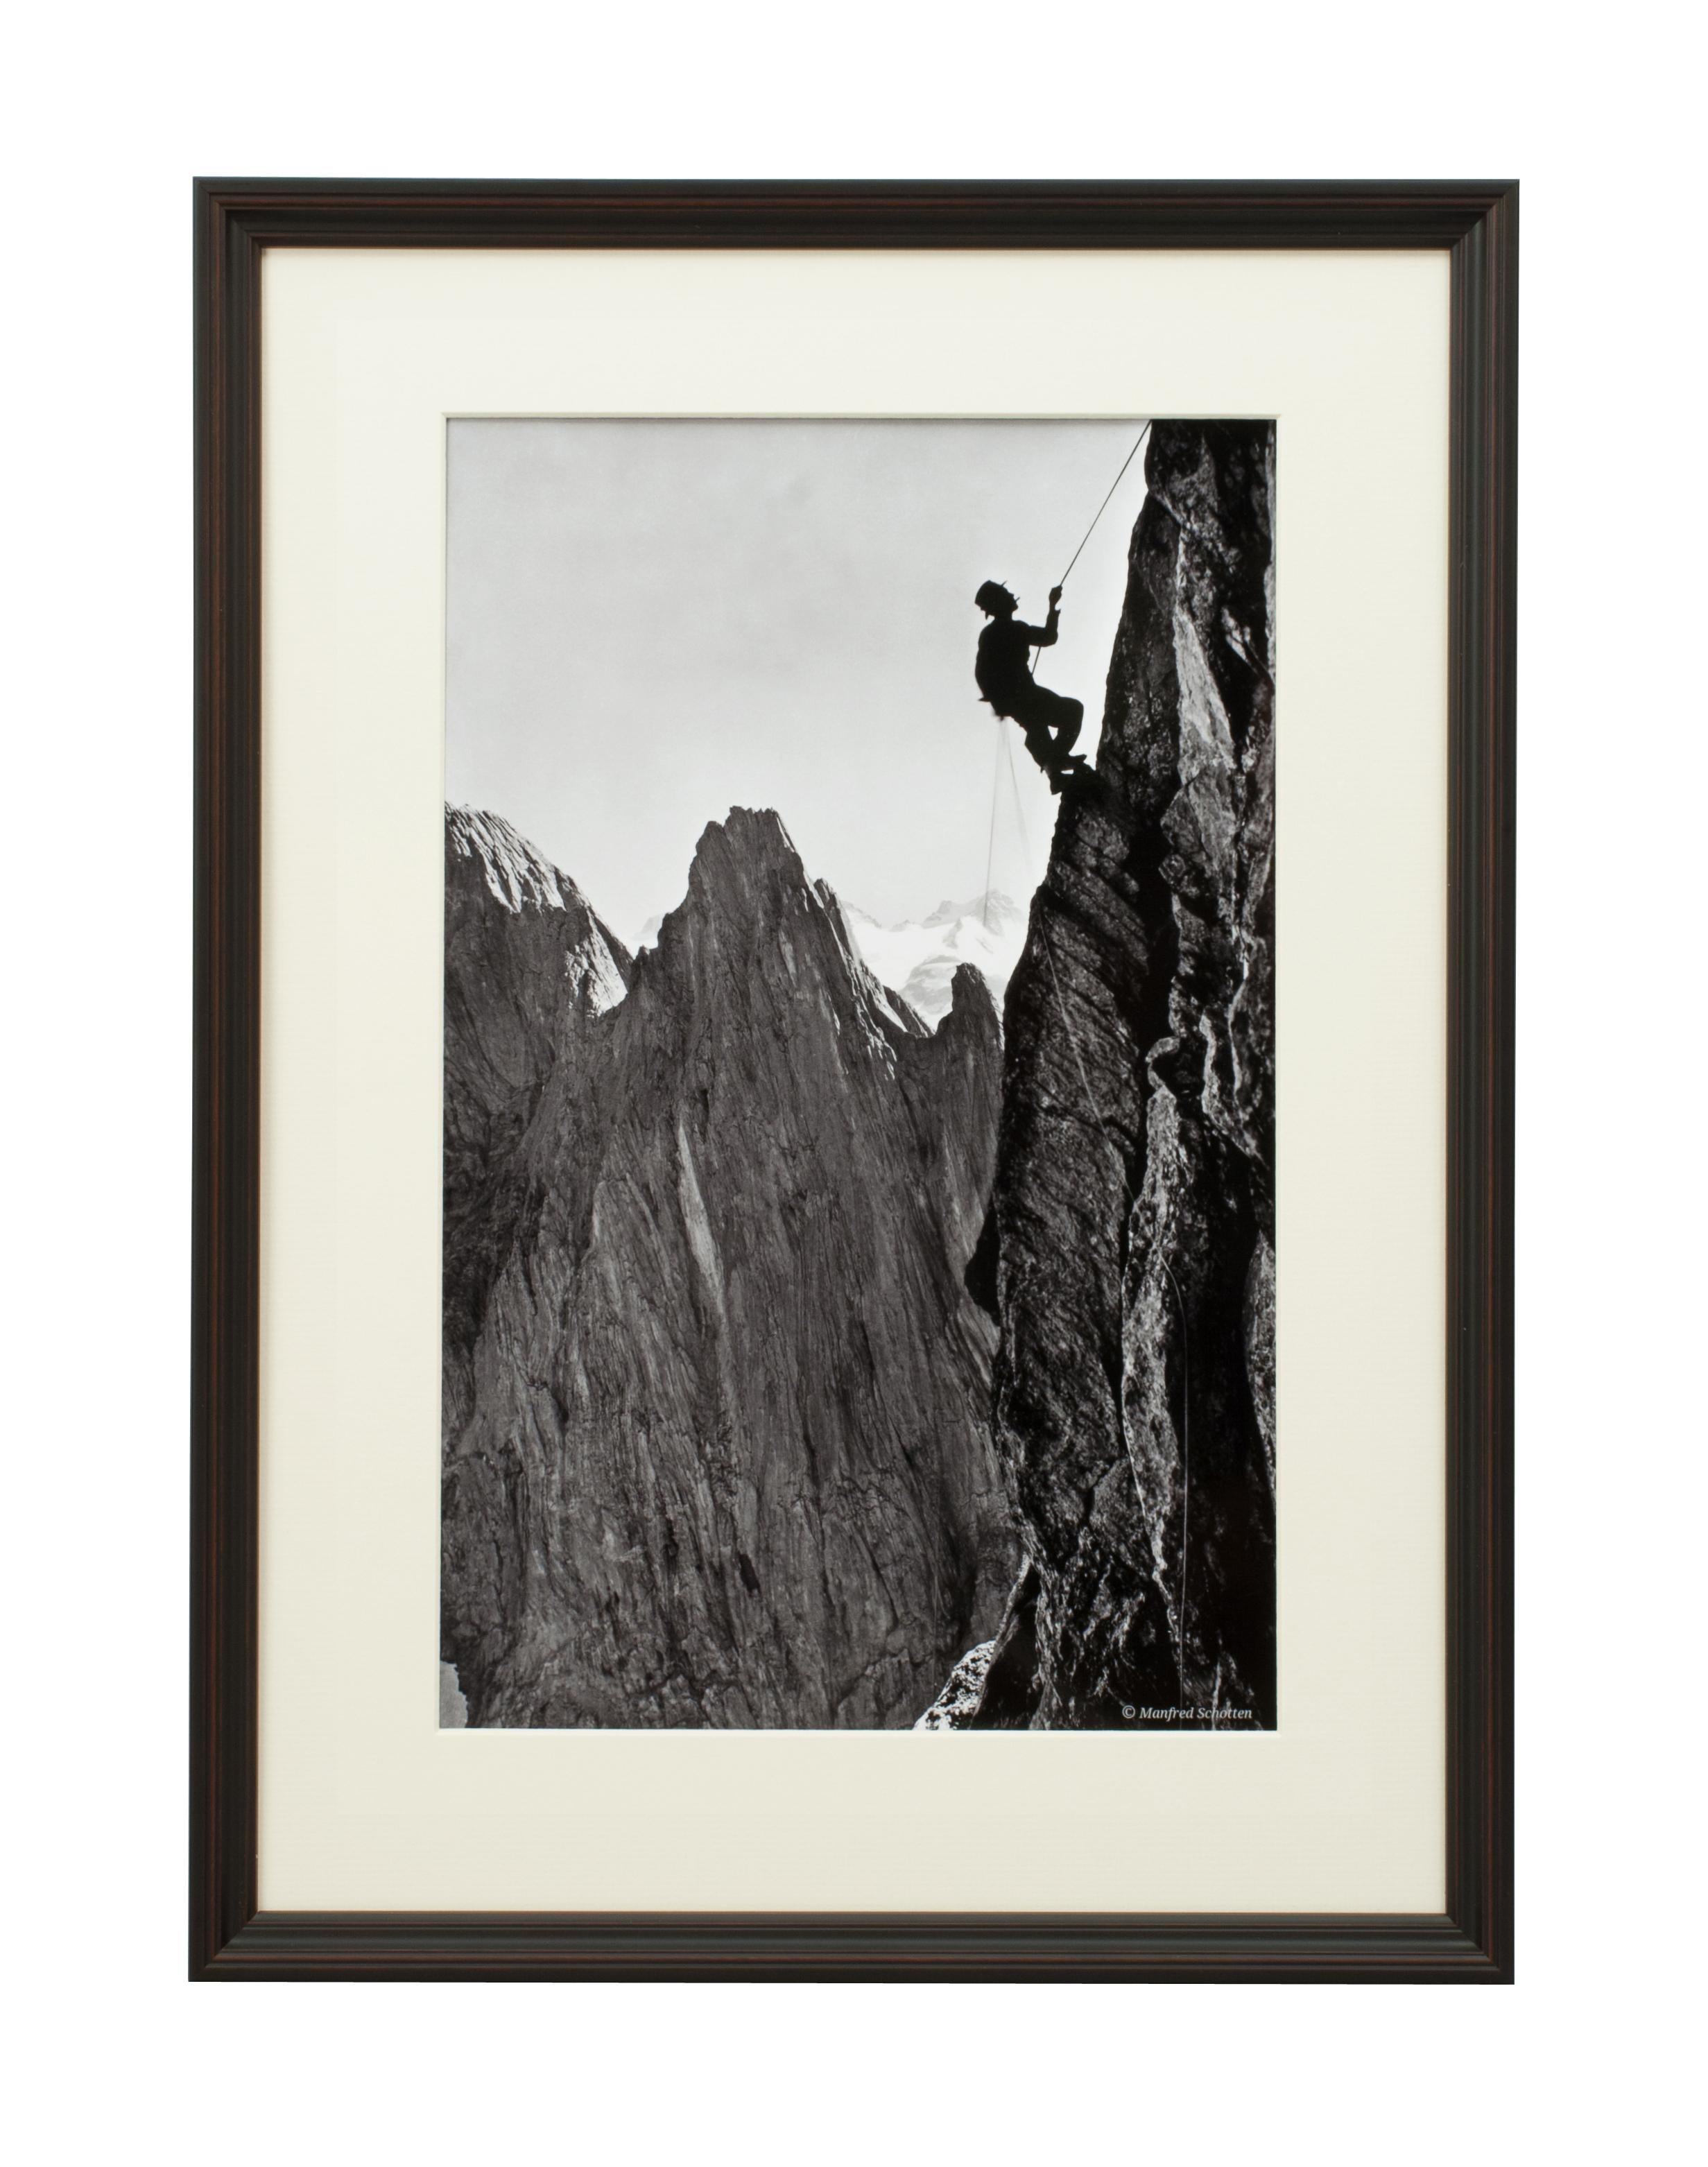 Vintage style photography, framed alpine ski photograph, Opps!.
'OPPS!', a modern framed and mounted black and white photographic image after an original 1930s skiing photograph. The frame is a hand colored reeded wooden black frame. Black & white